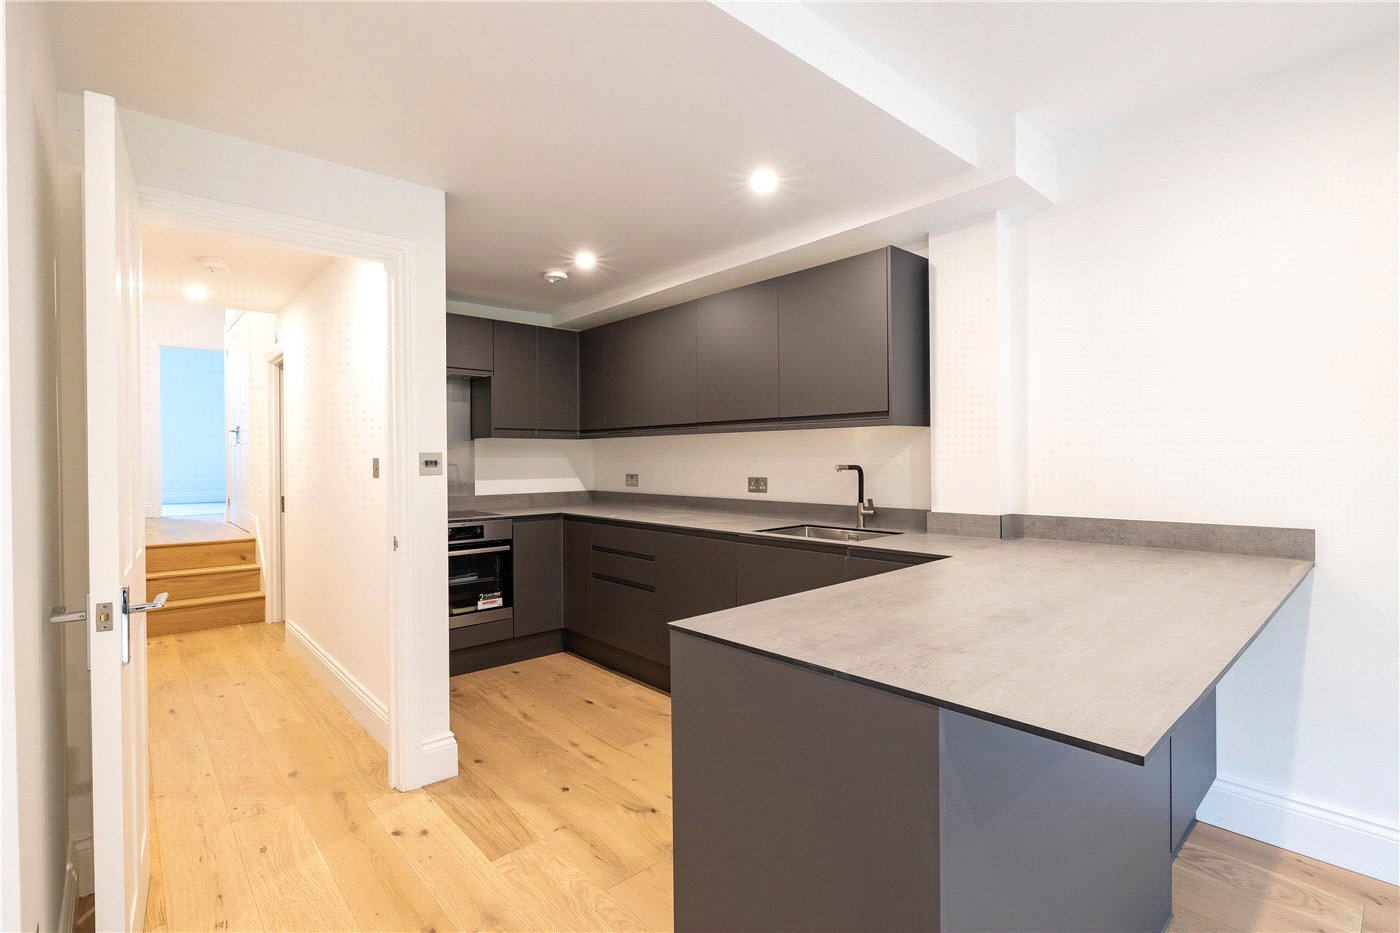 converted basement with modern kitchen after basement conversion London